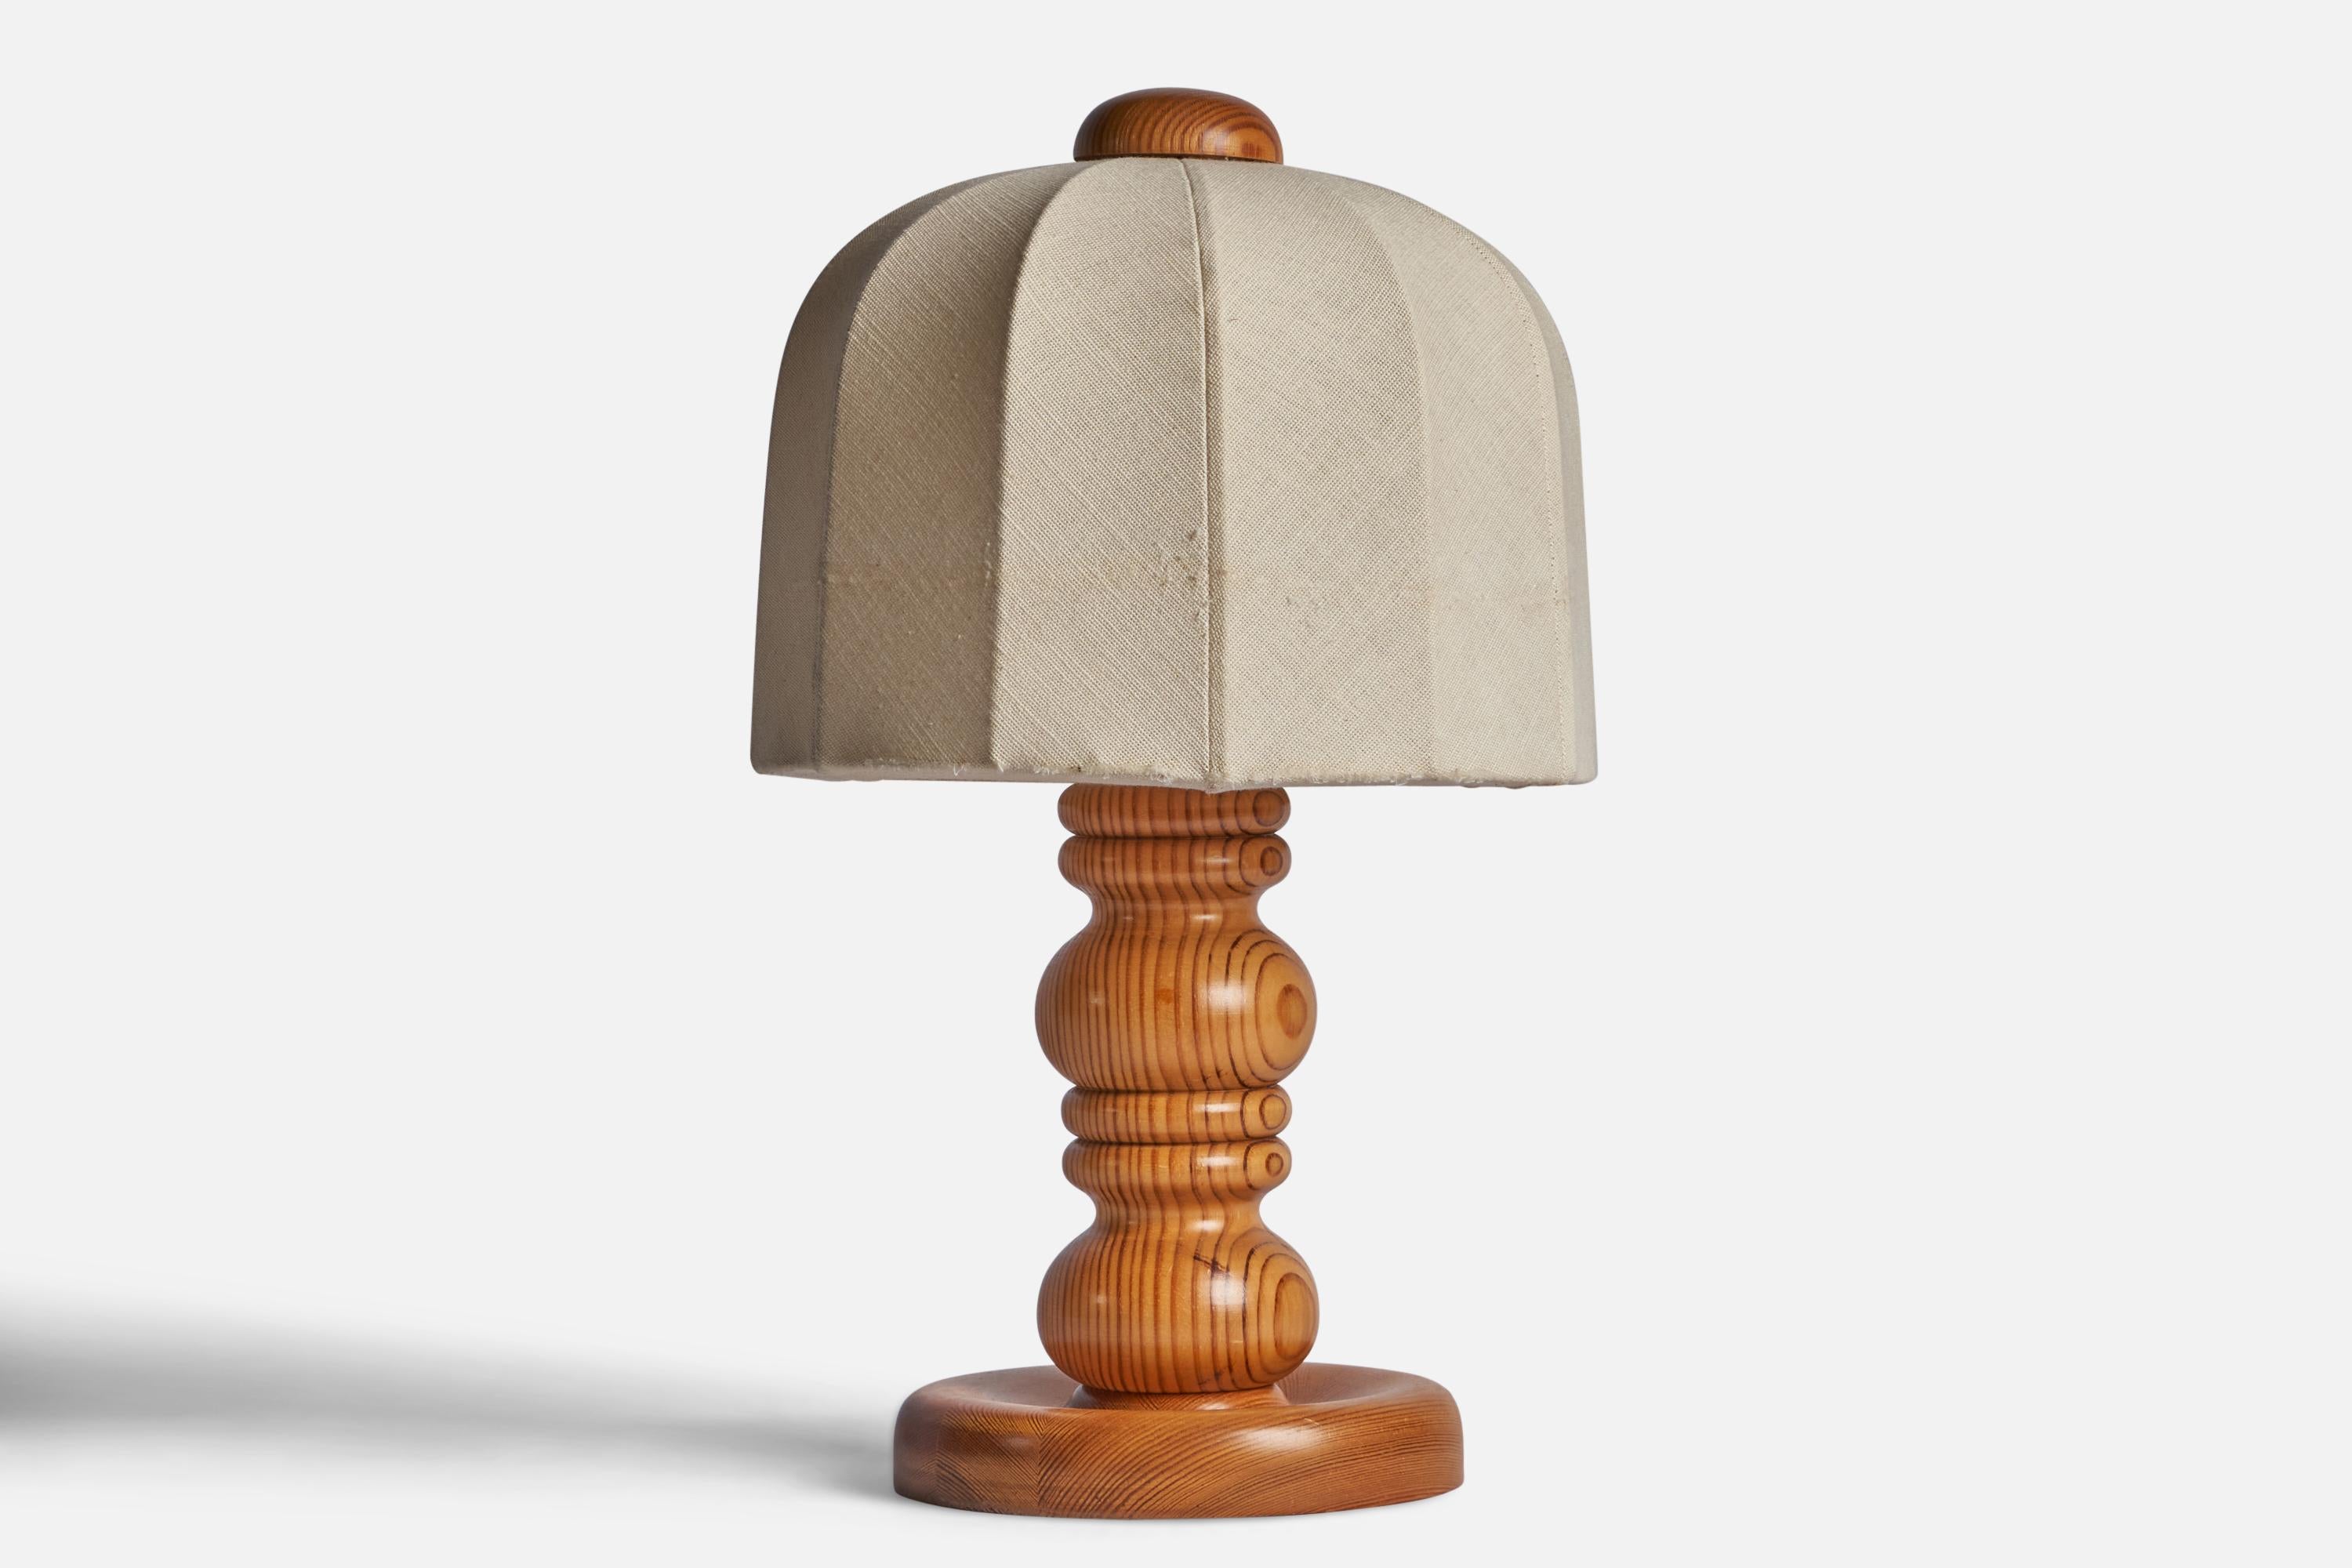 A pine and off-white fabric table lamp designed and produced in Sweden, c. 1970s.

Overall Dimensions (inches): 17.5” H x 10